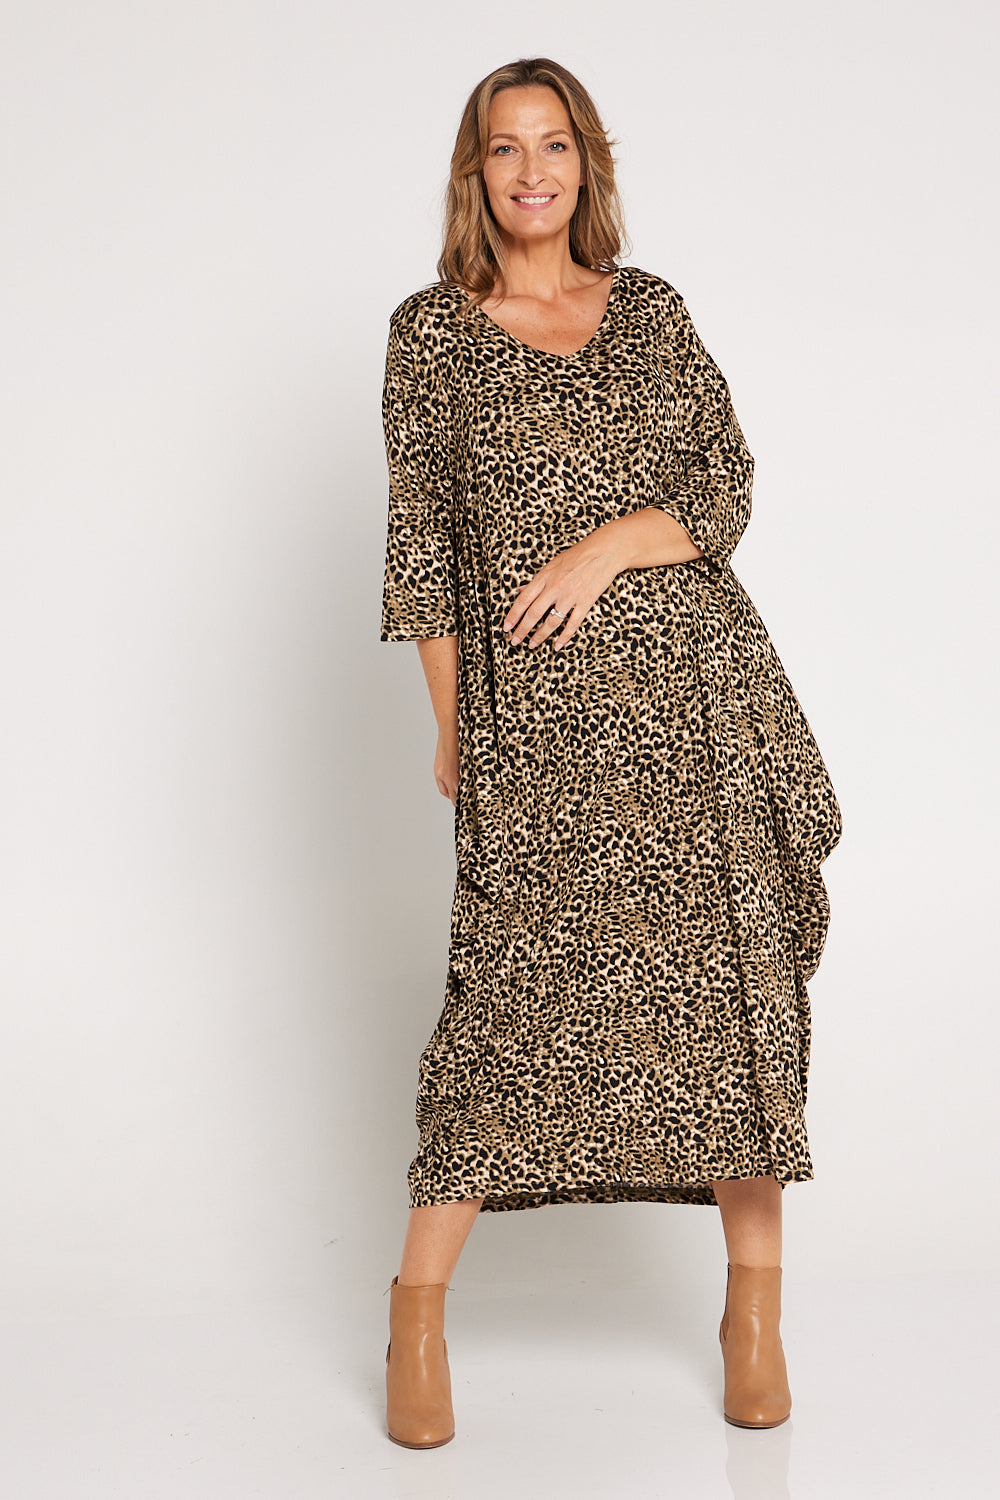 Leish Ribbed Dress - Leopard